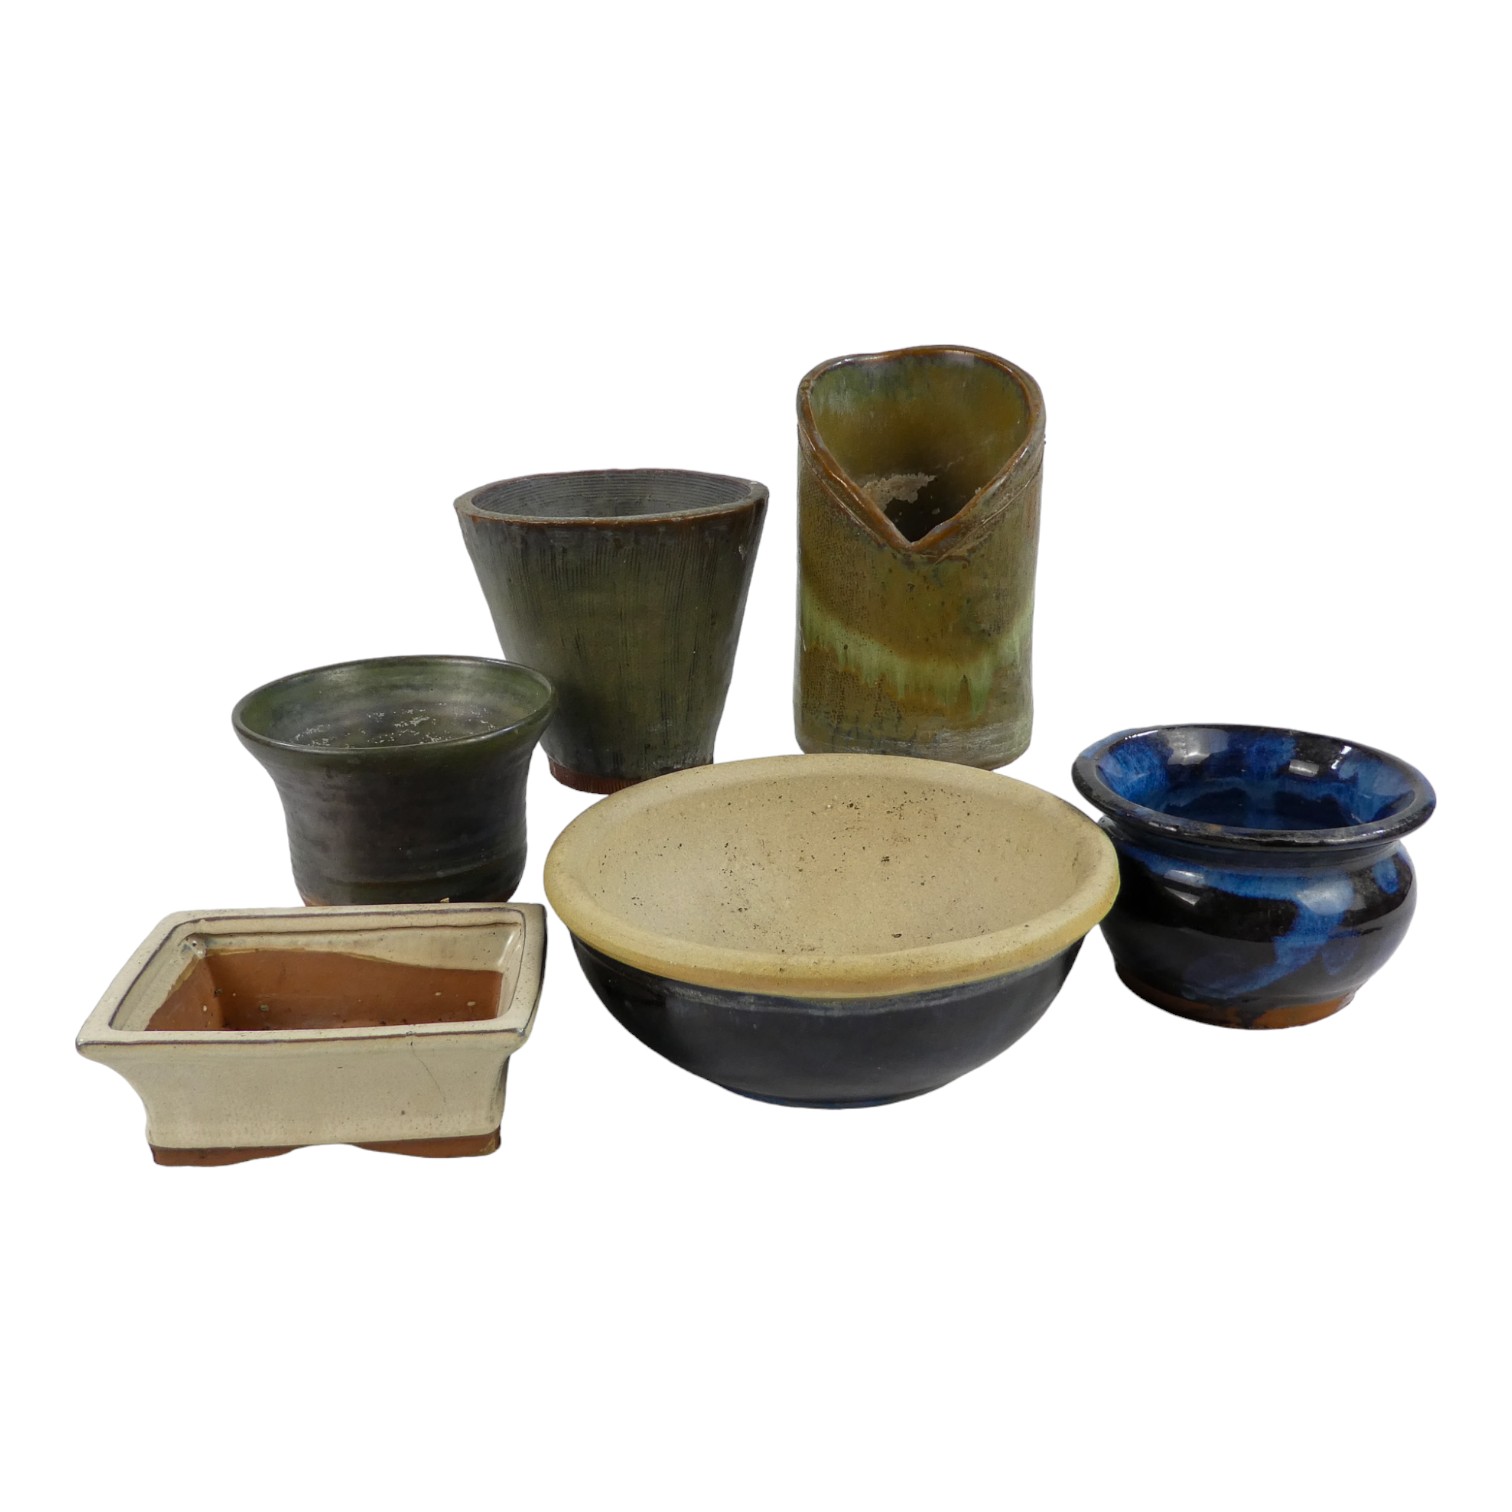 A quantity of 20th century glazed flower pots - a variety of colours and forms.